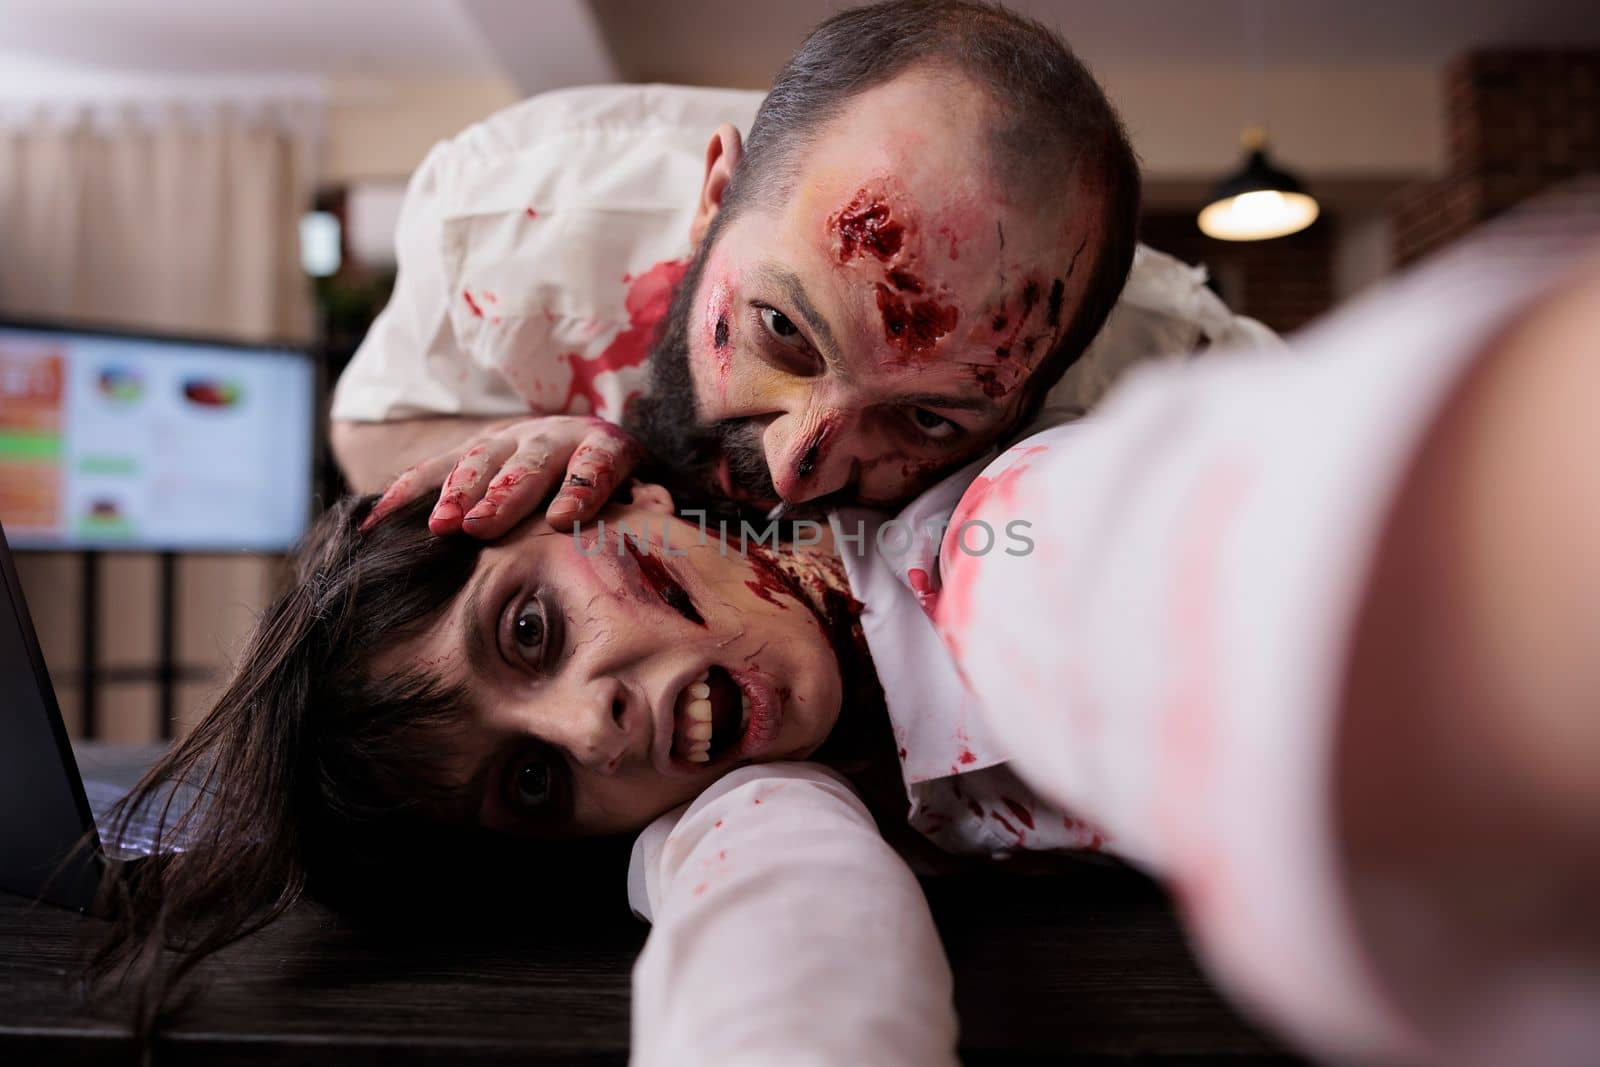 Scary horror zombies biting wounds in office, looking creepy cruel and terrifying at desk. Walking dead evil couple of corpses with blood on scars, spooky dramatic eerie nightmare with monsters.